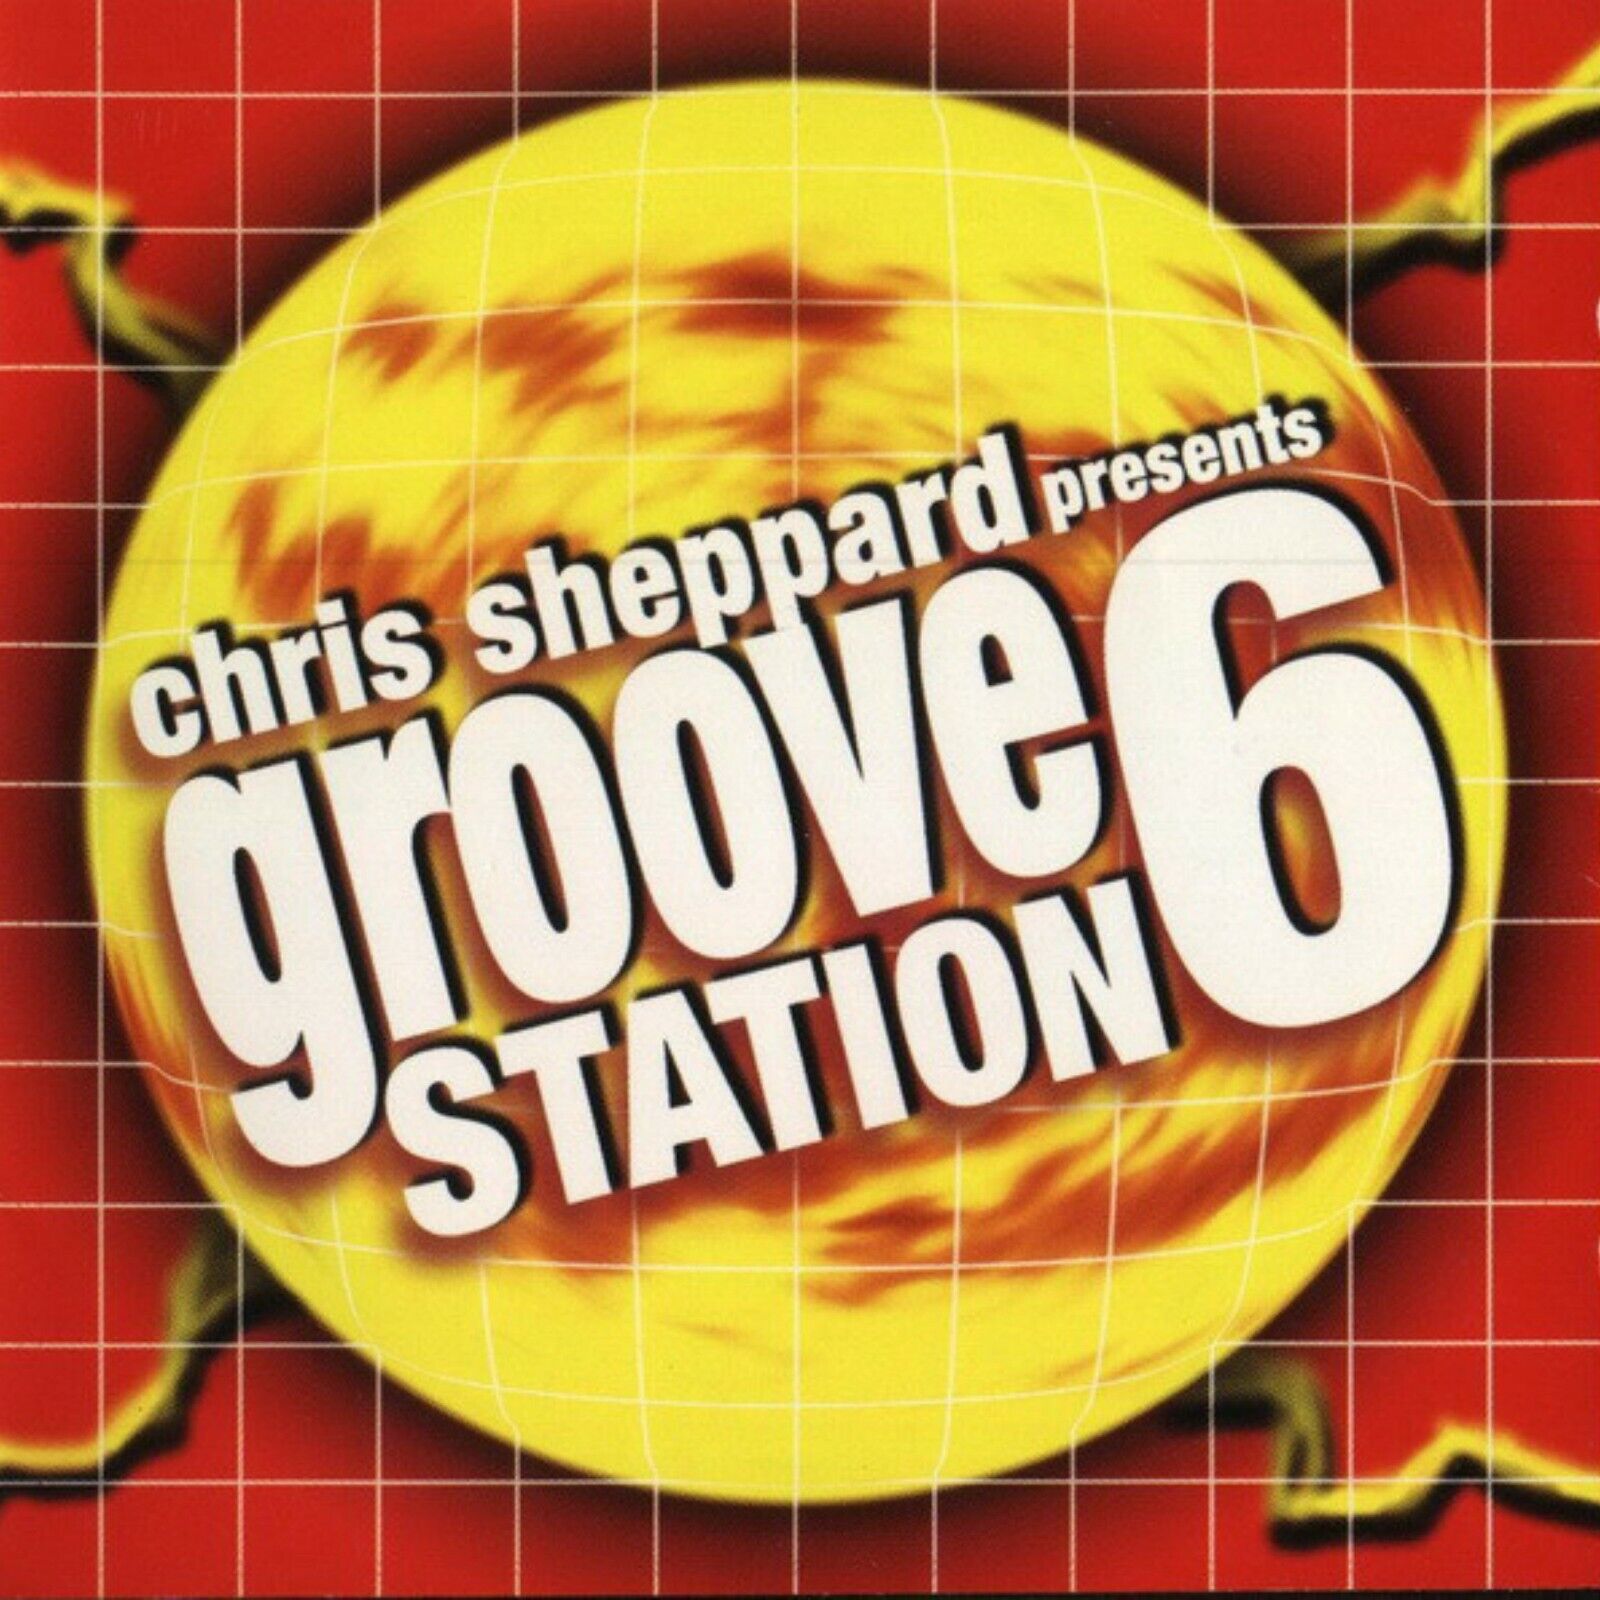 Chris Sheppard Presents Groove Station 6 CD